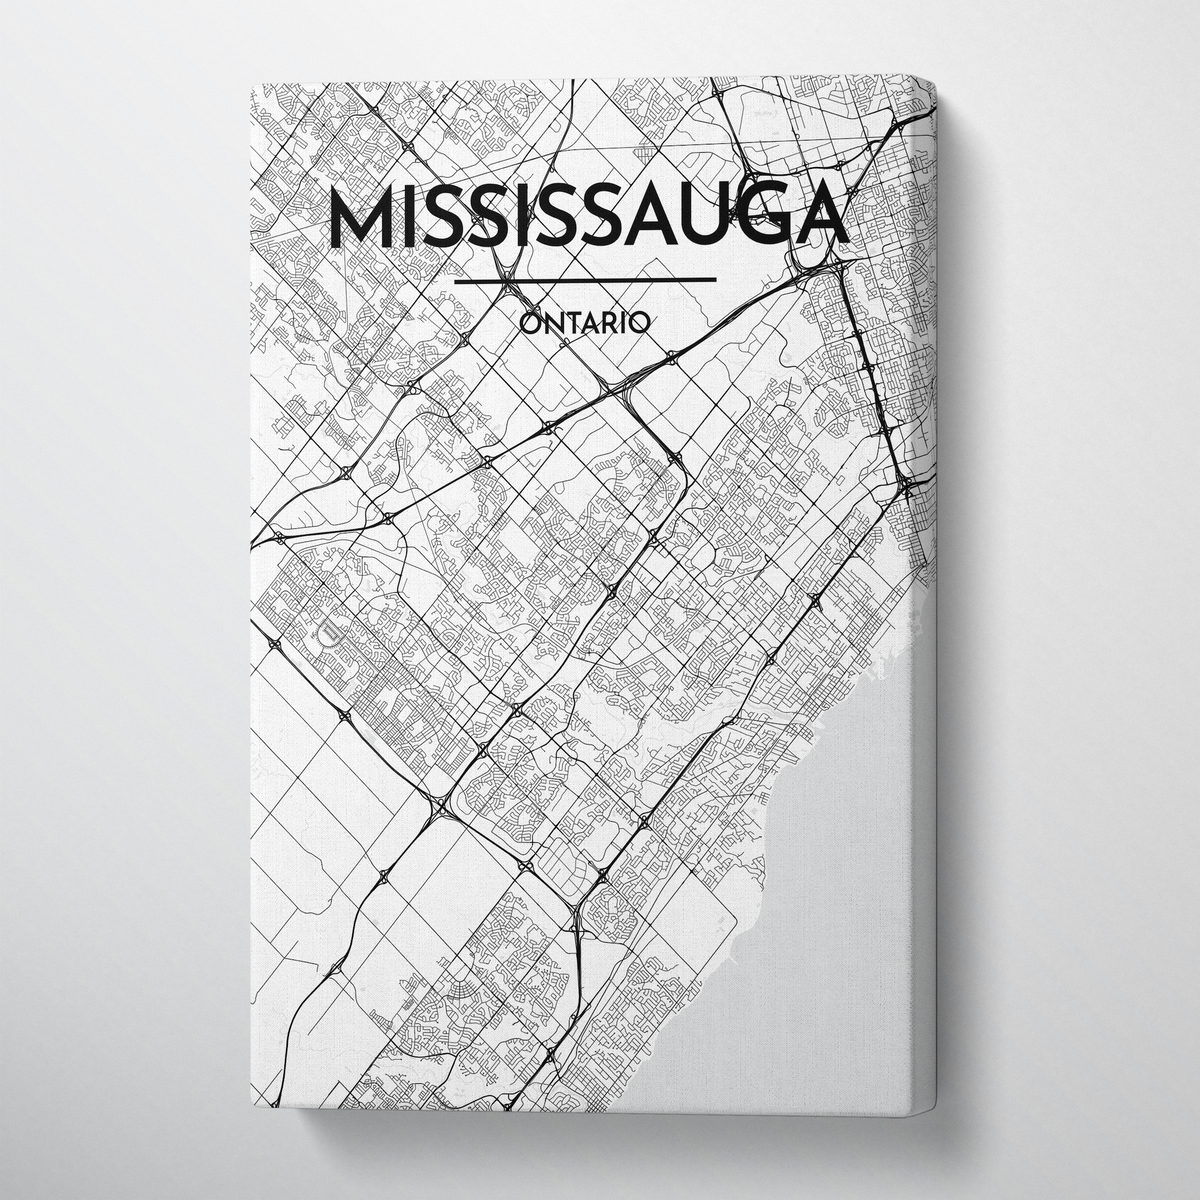 Missisauga City Map Canvas Wrap - Point Two Design - Black and White